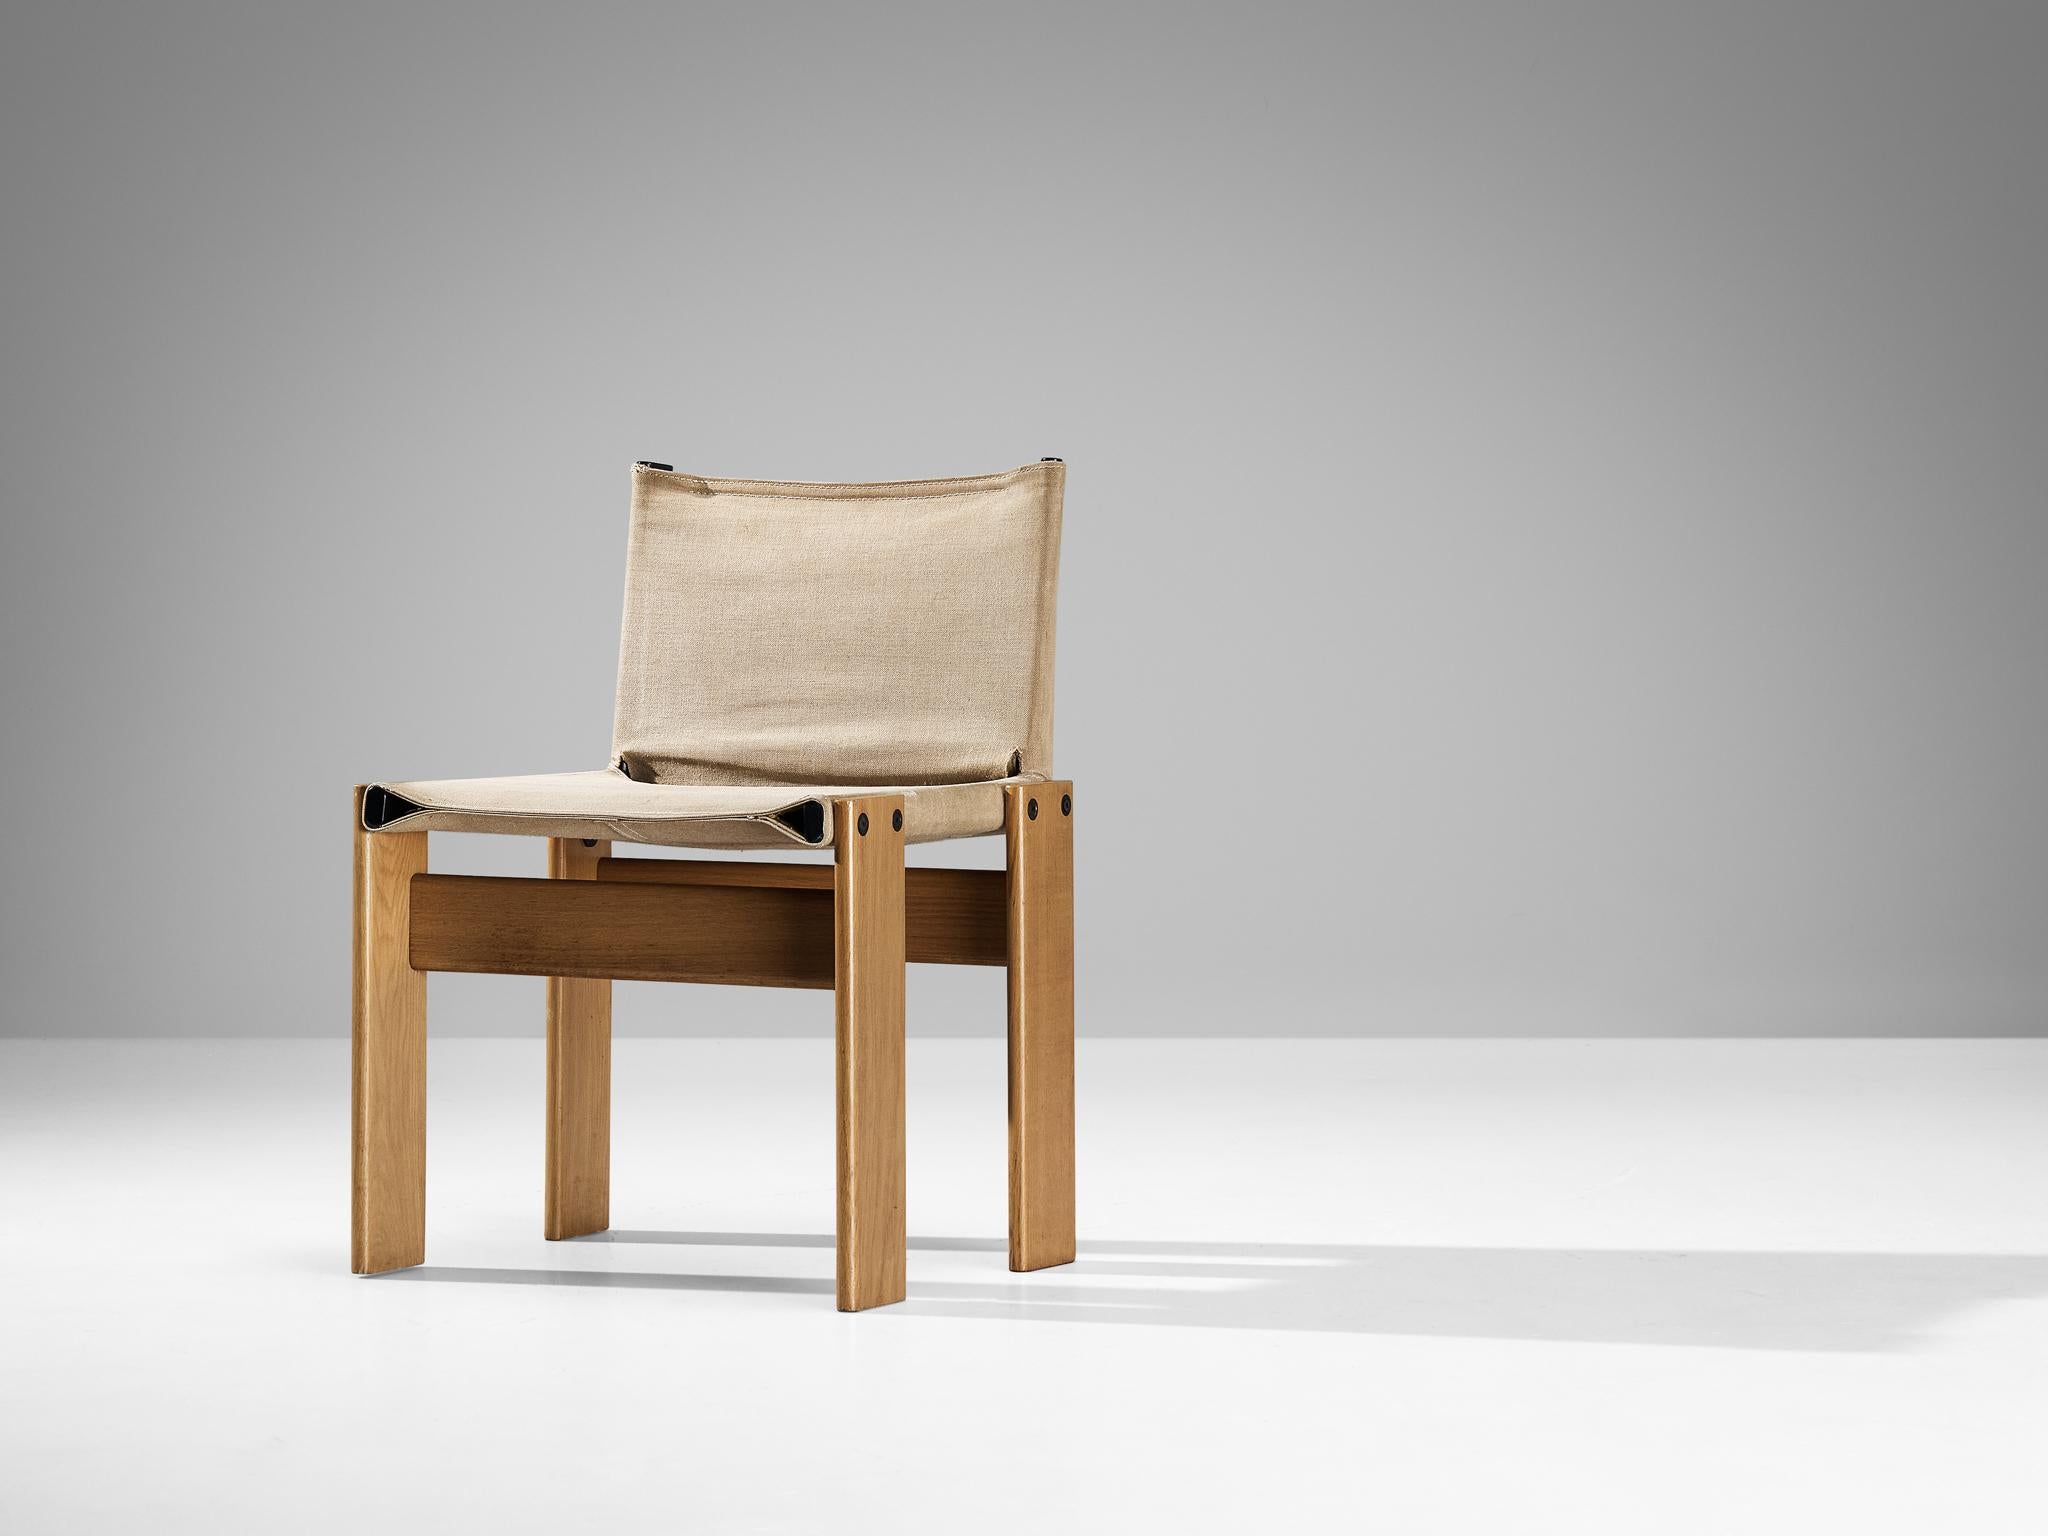 Afra & Tobia Scarpa for Molteni, 'Monk' dining chair, oak, canvas, steel, plastic, Italy, 1974.

The beige canvas forms a striking combination with the oak wood. Interesting is the 'flat' shape of this chair where the designer has chosen to place